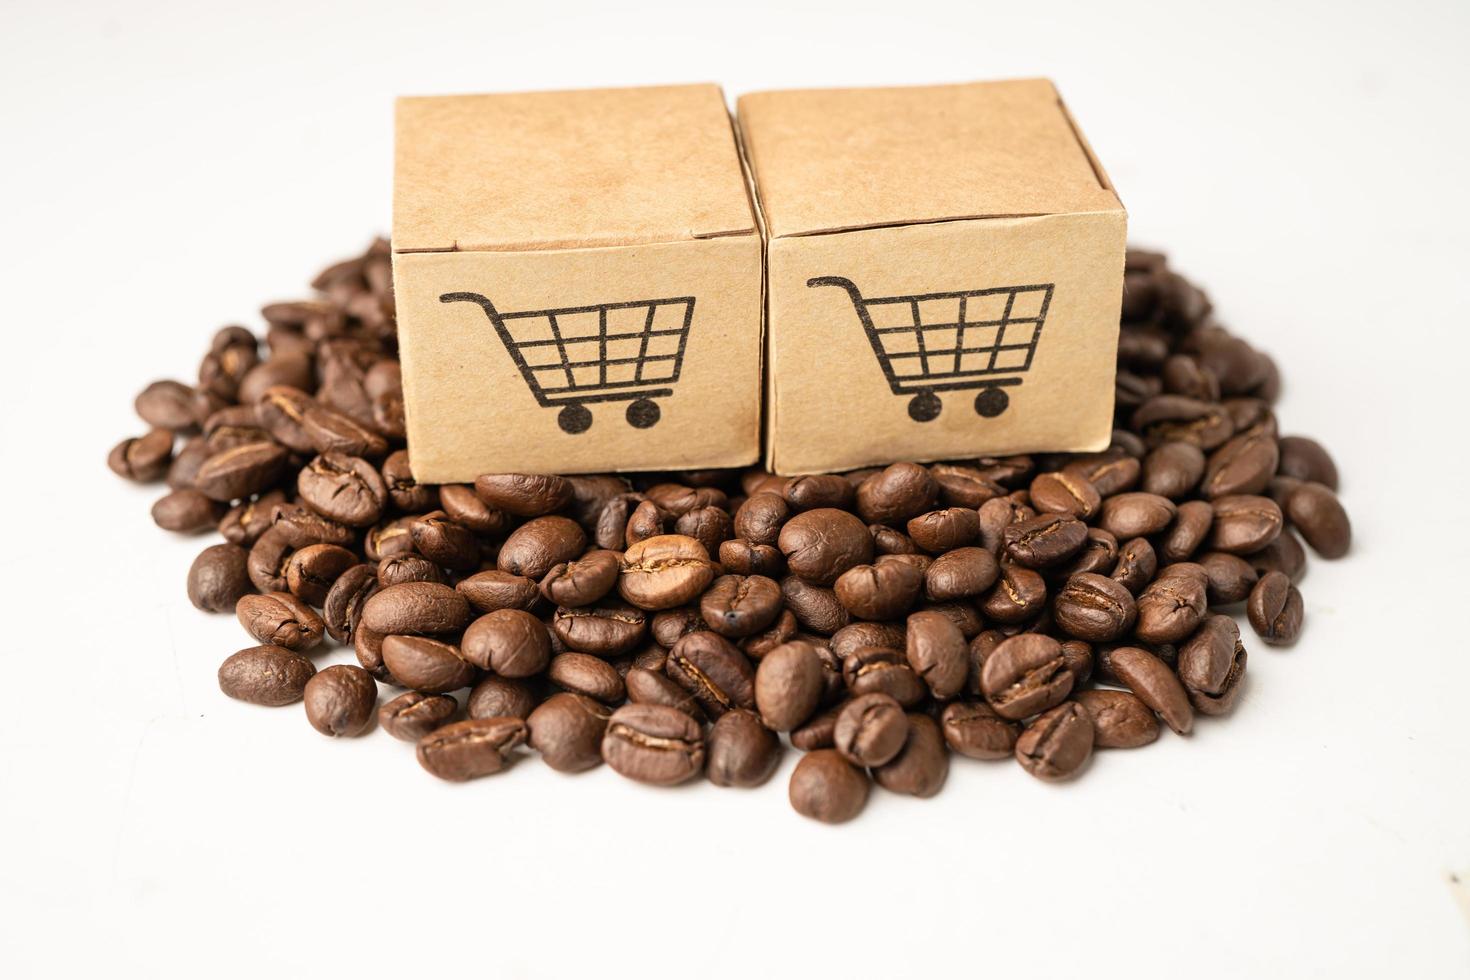 Box with shopping cart logo symbol on coffee beans import Export concept photo